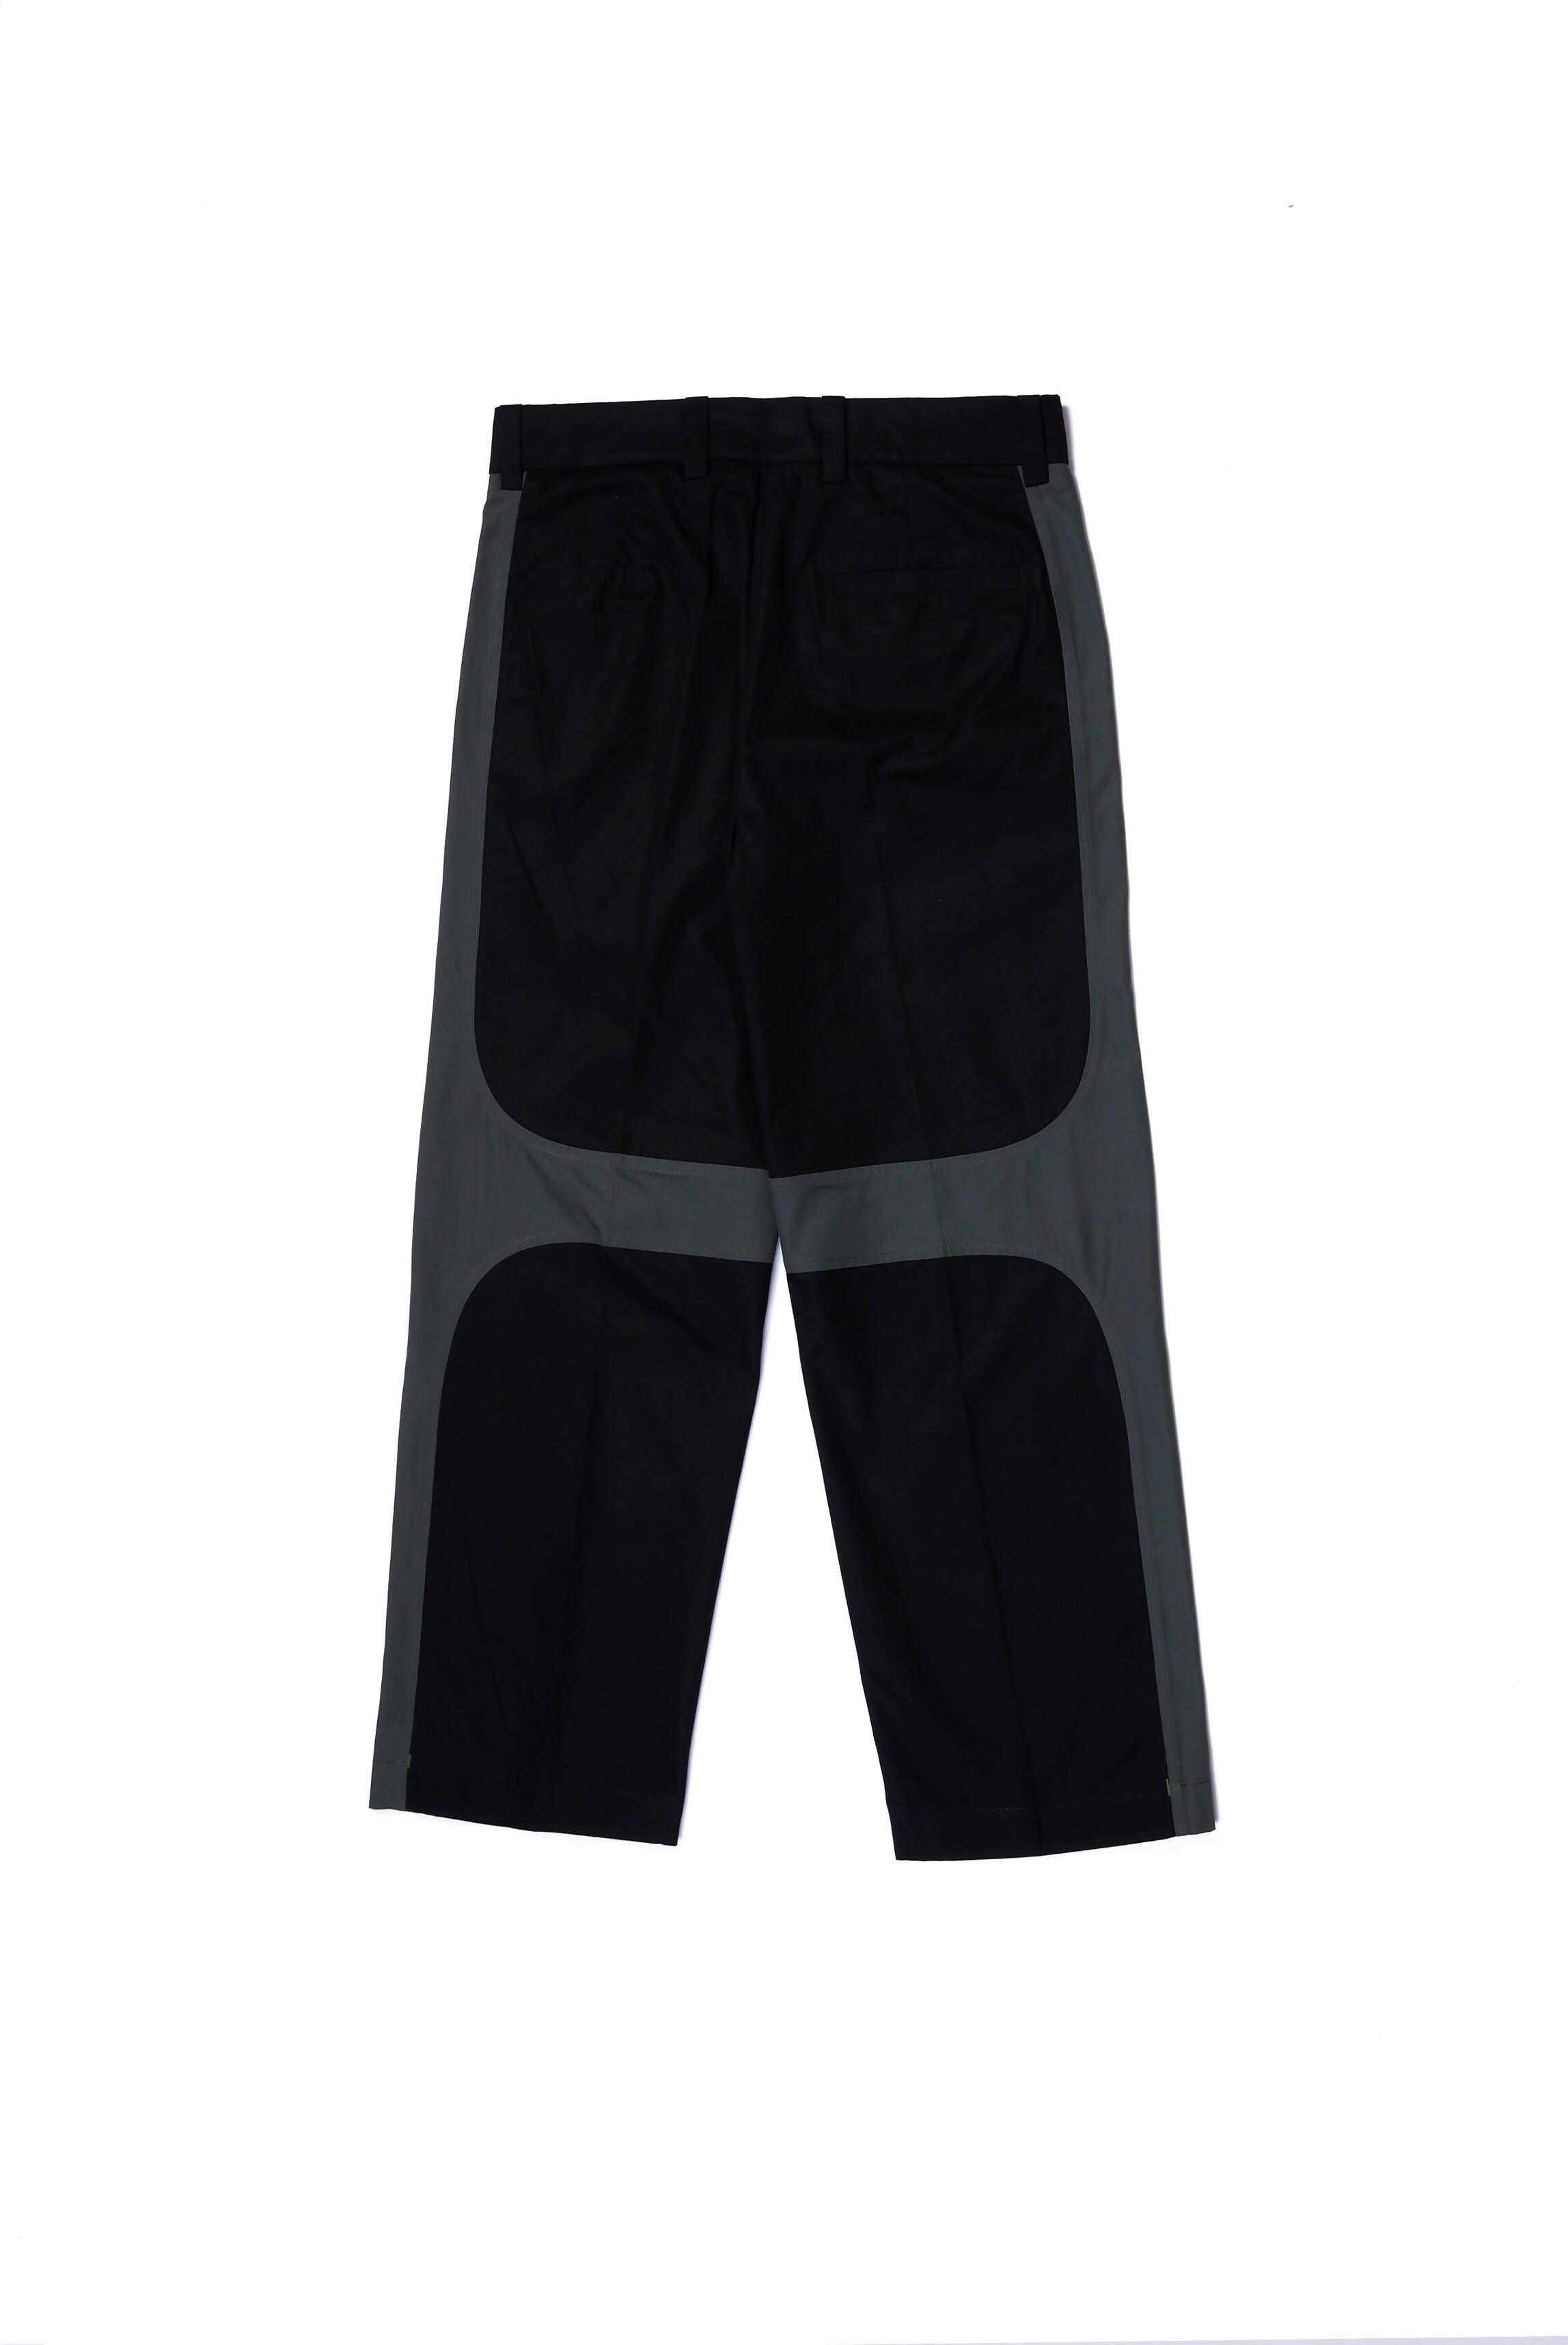 Symbolic cut straight fit trouser